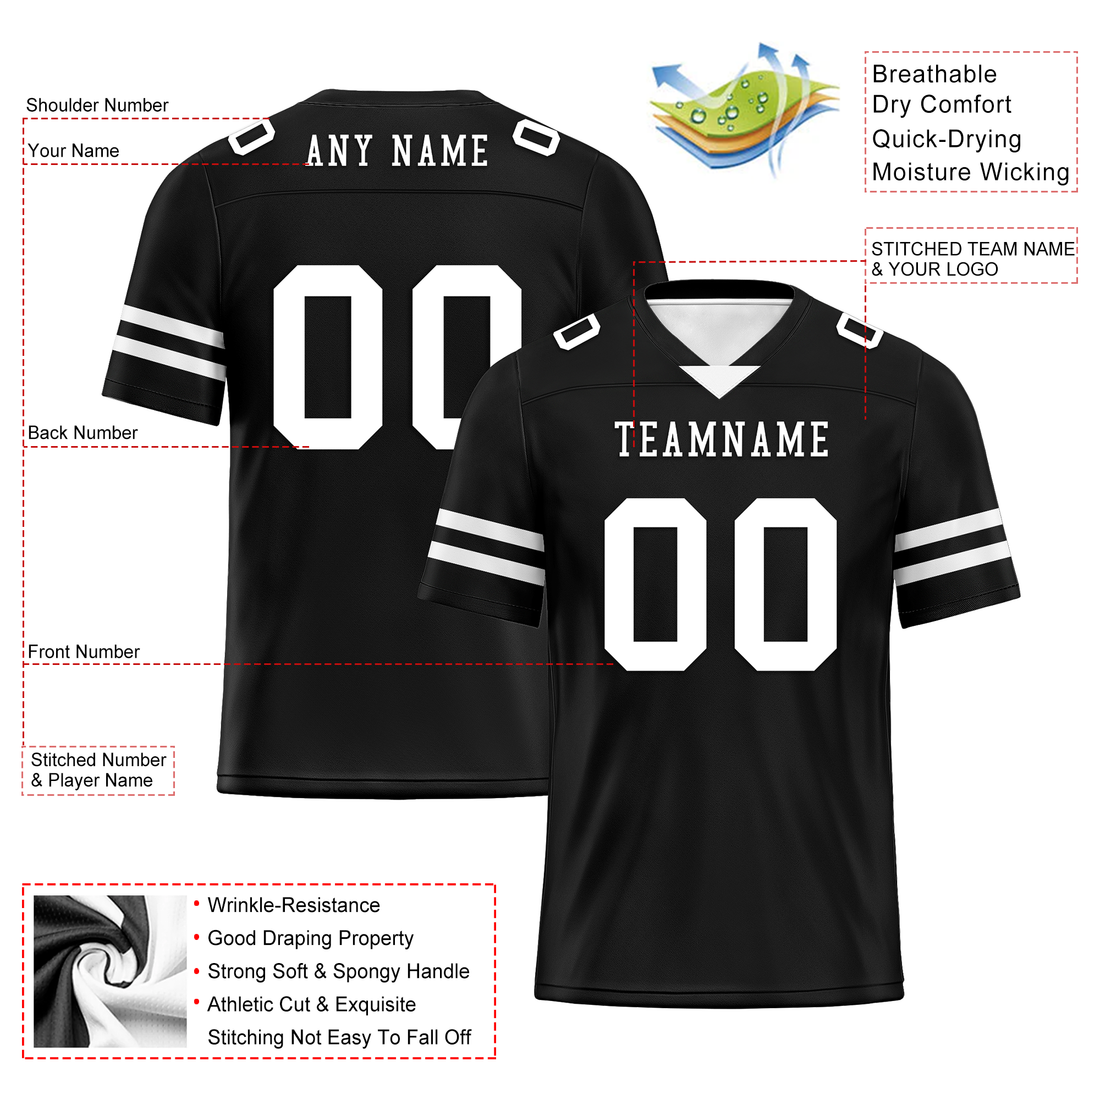 Custom Black Classic Style Personalized Authentic Football Jersey FBJ02-bd0a70bc